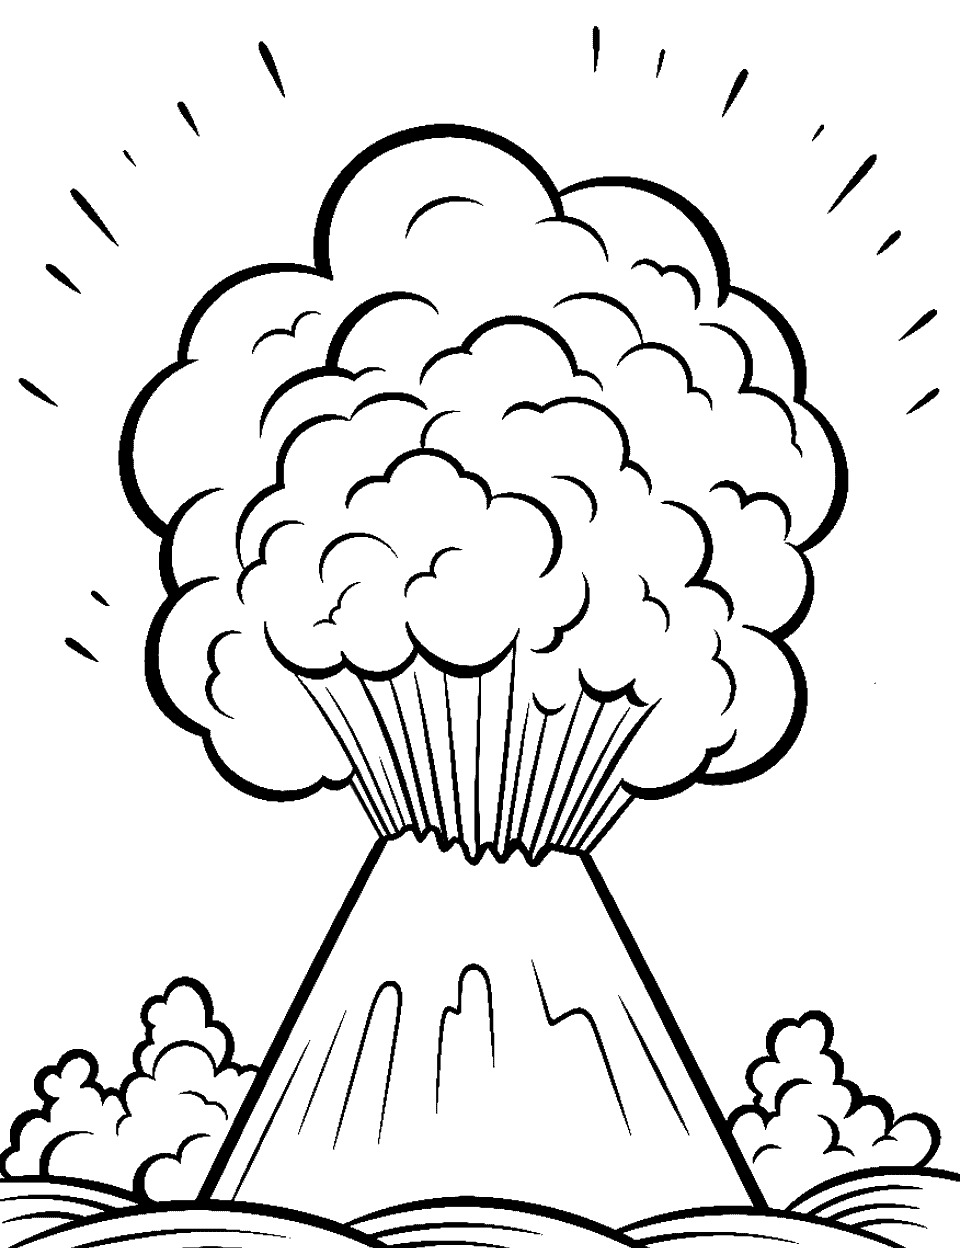 Volcano Venture Coloring Page - An easy-to-draw and color volcano eruption scene.